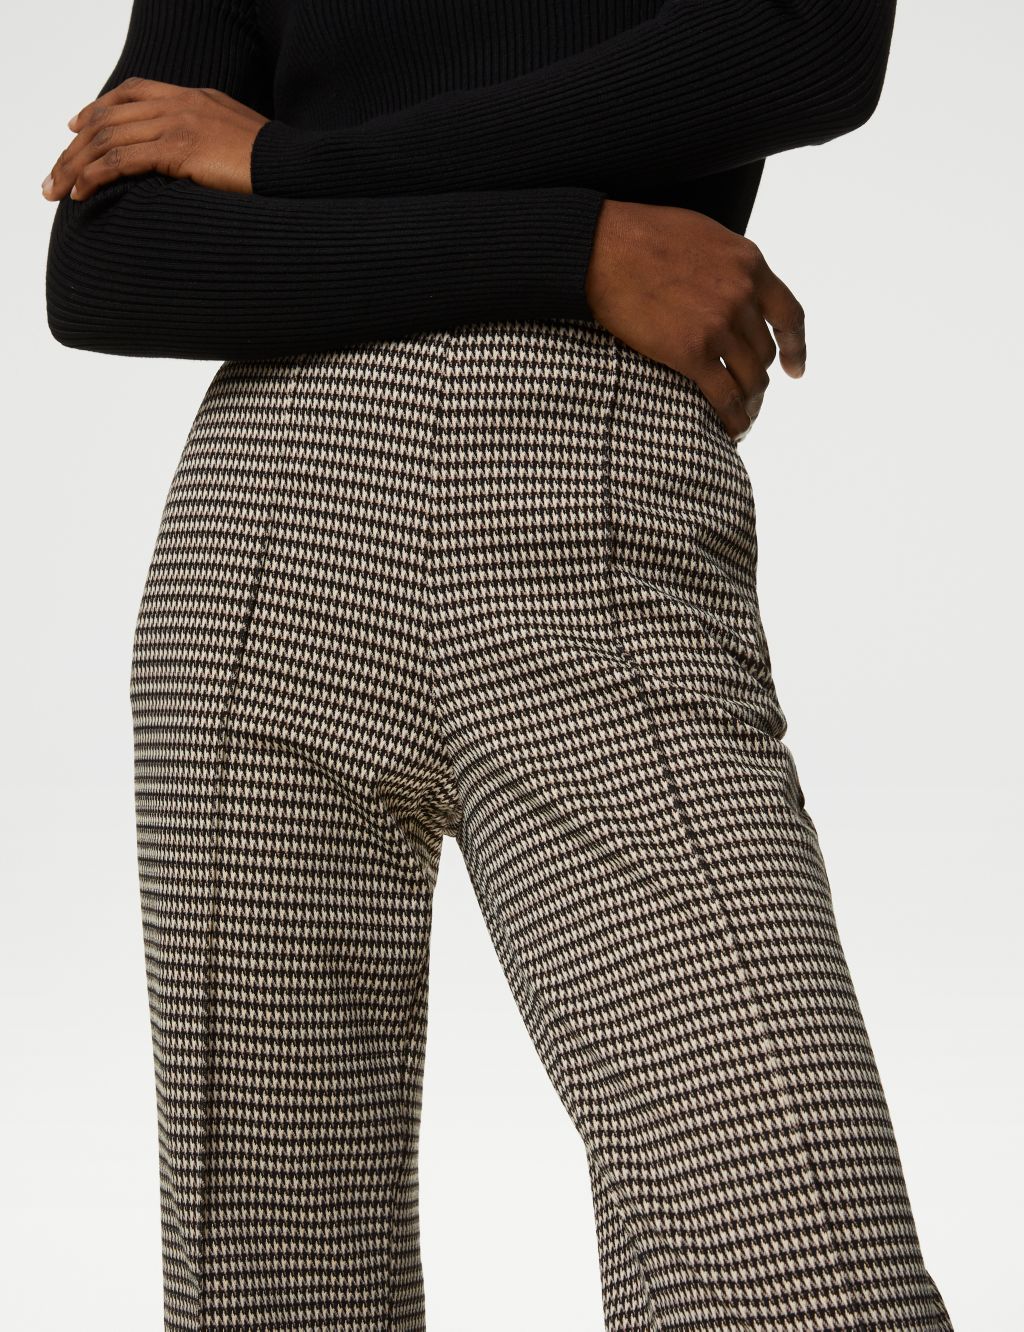 Twill Jersey Houndstooth Pintuck Trousers image 4